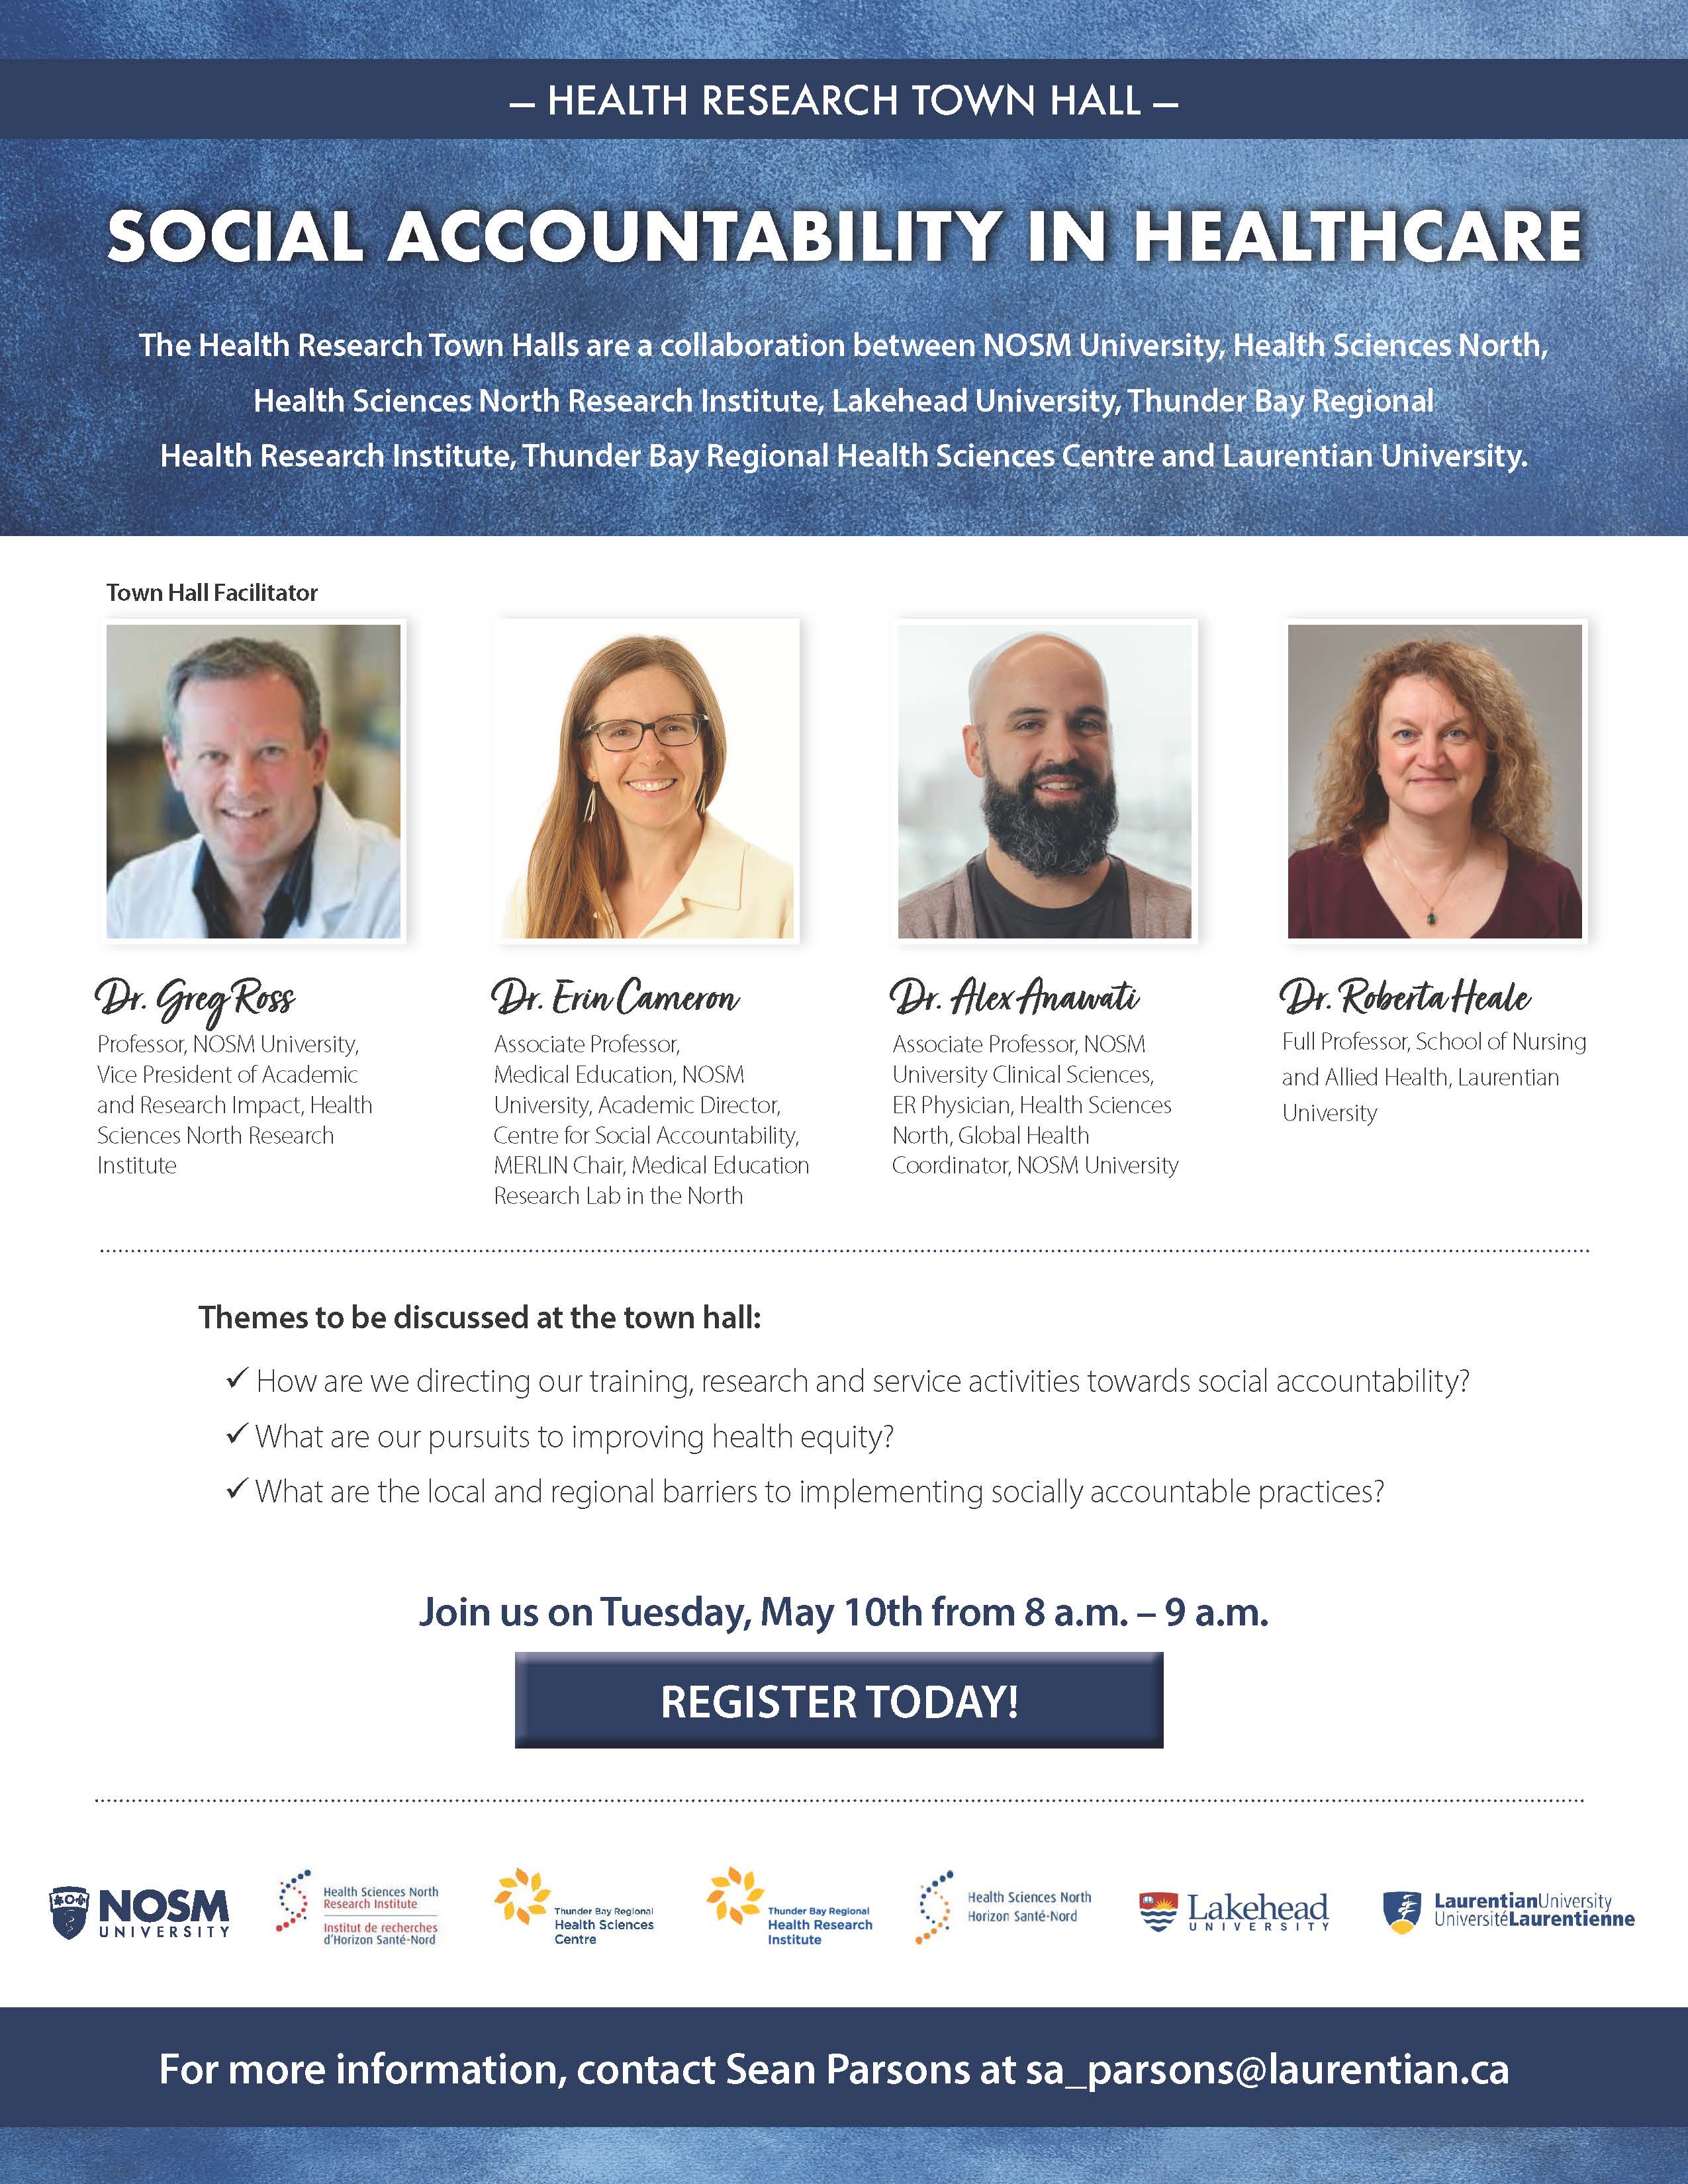 Poster showing speakers for Social Accountability in Healthcare